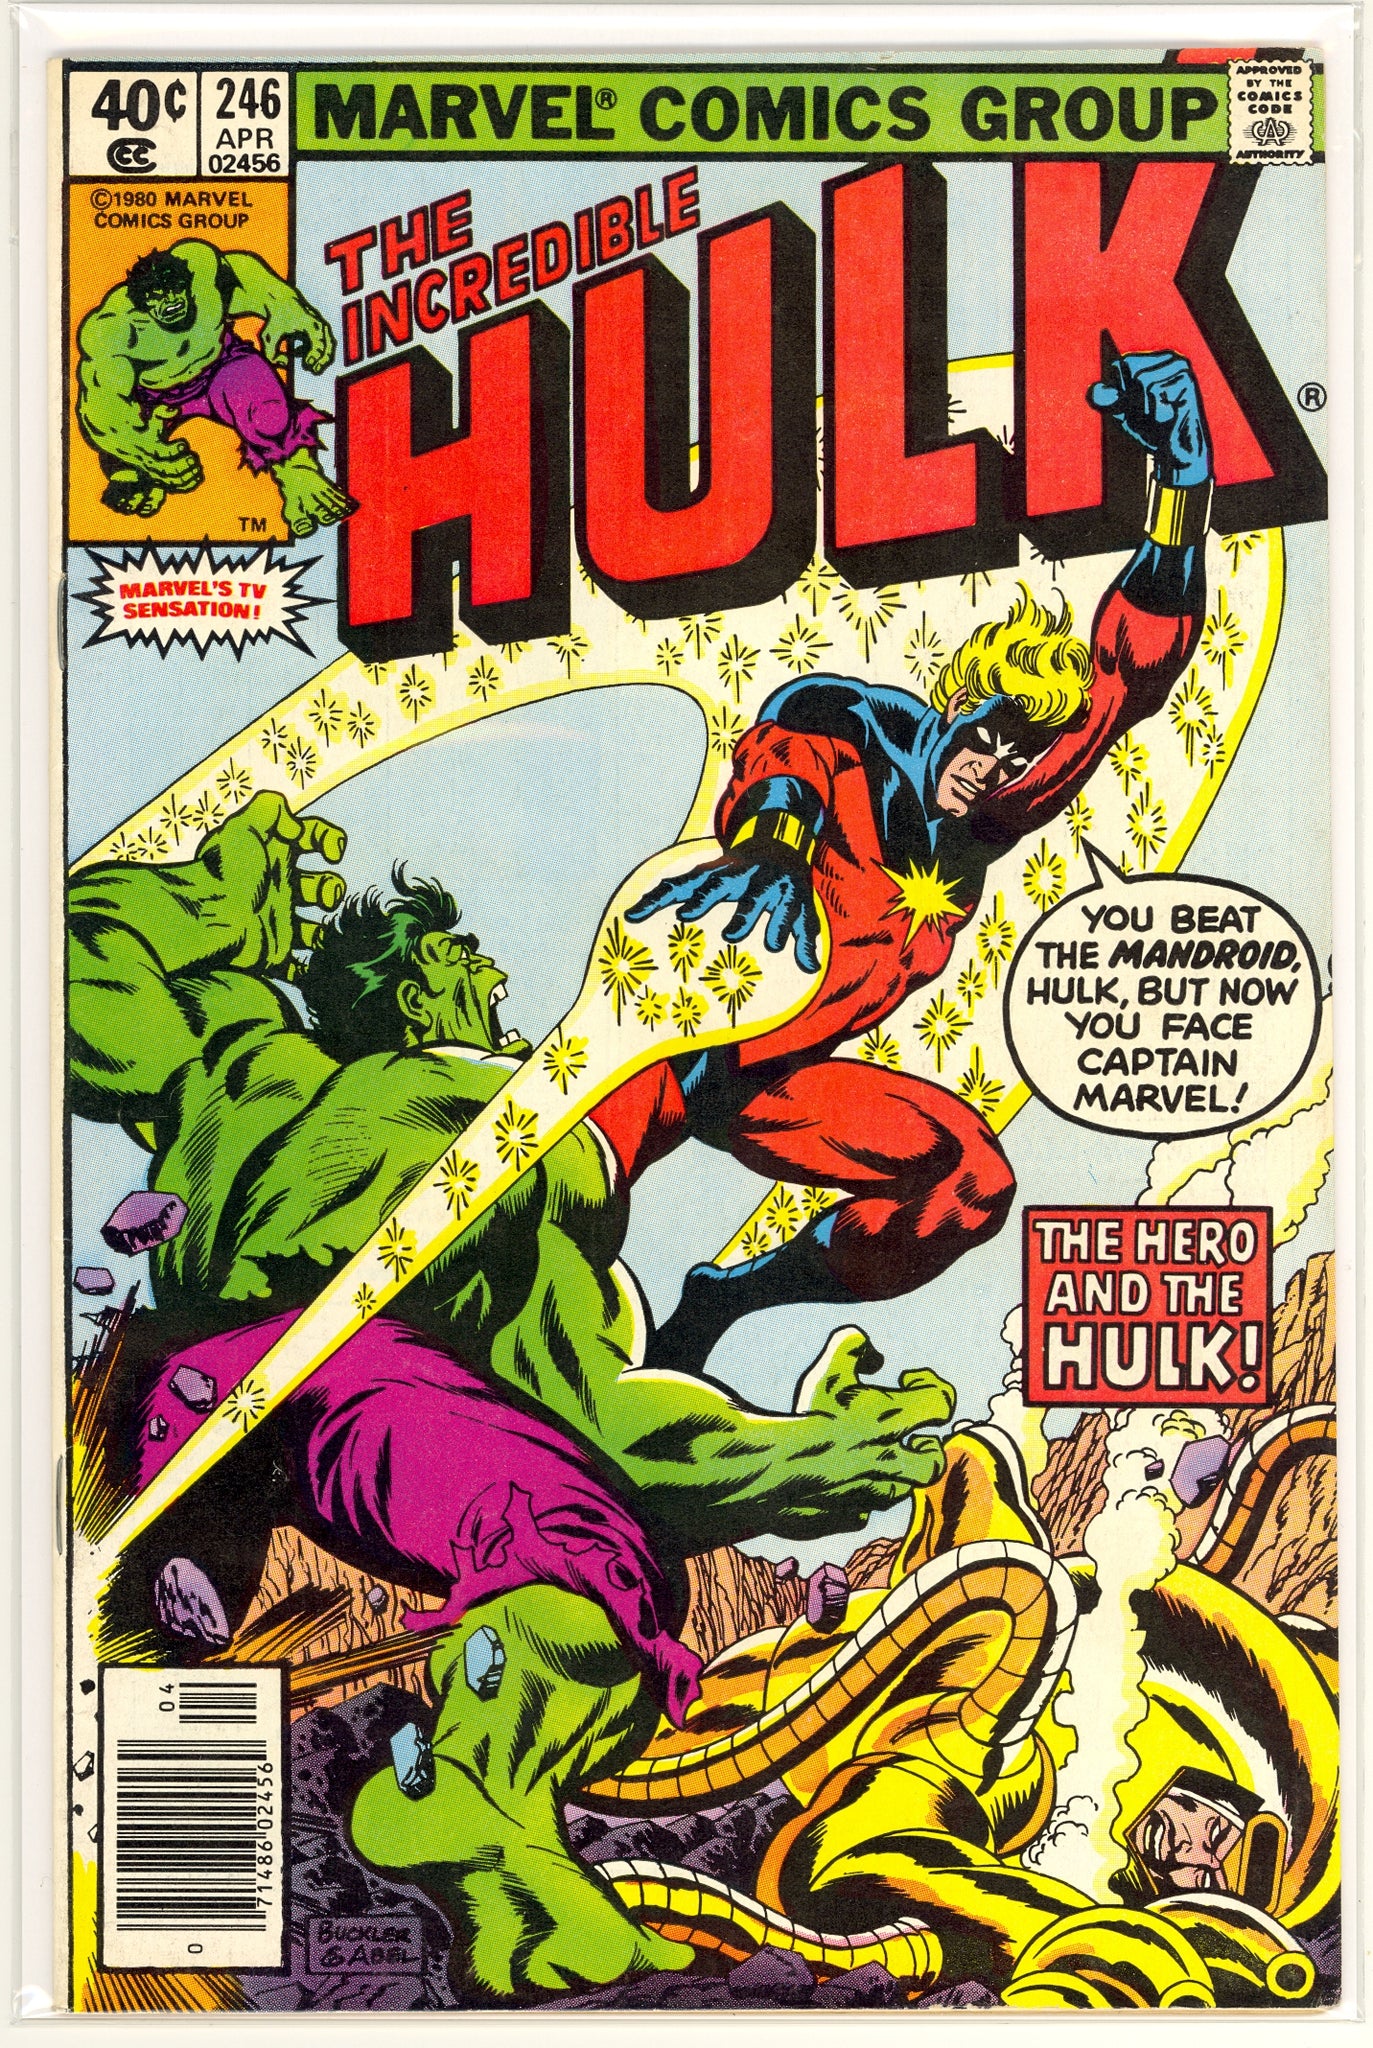 Incredible Hulk #246 (1980) newsstand edition - Captain Marvel